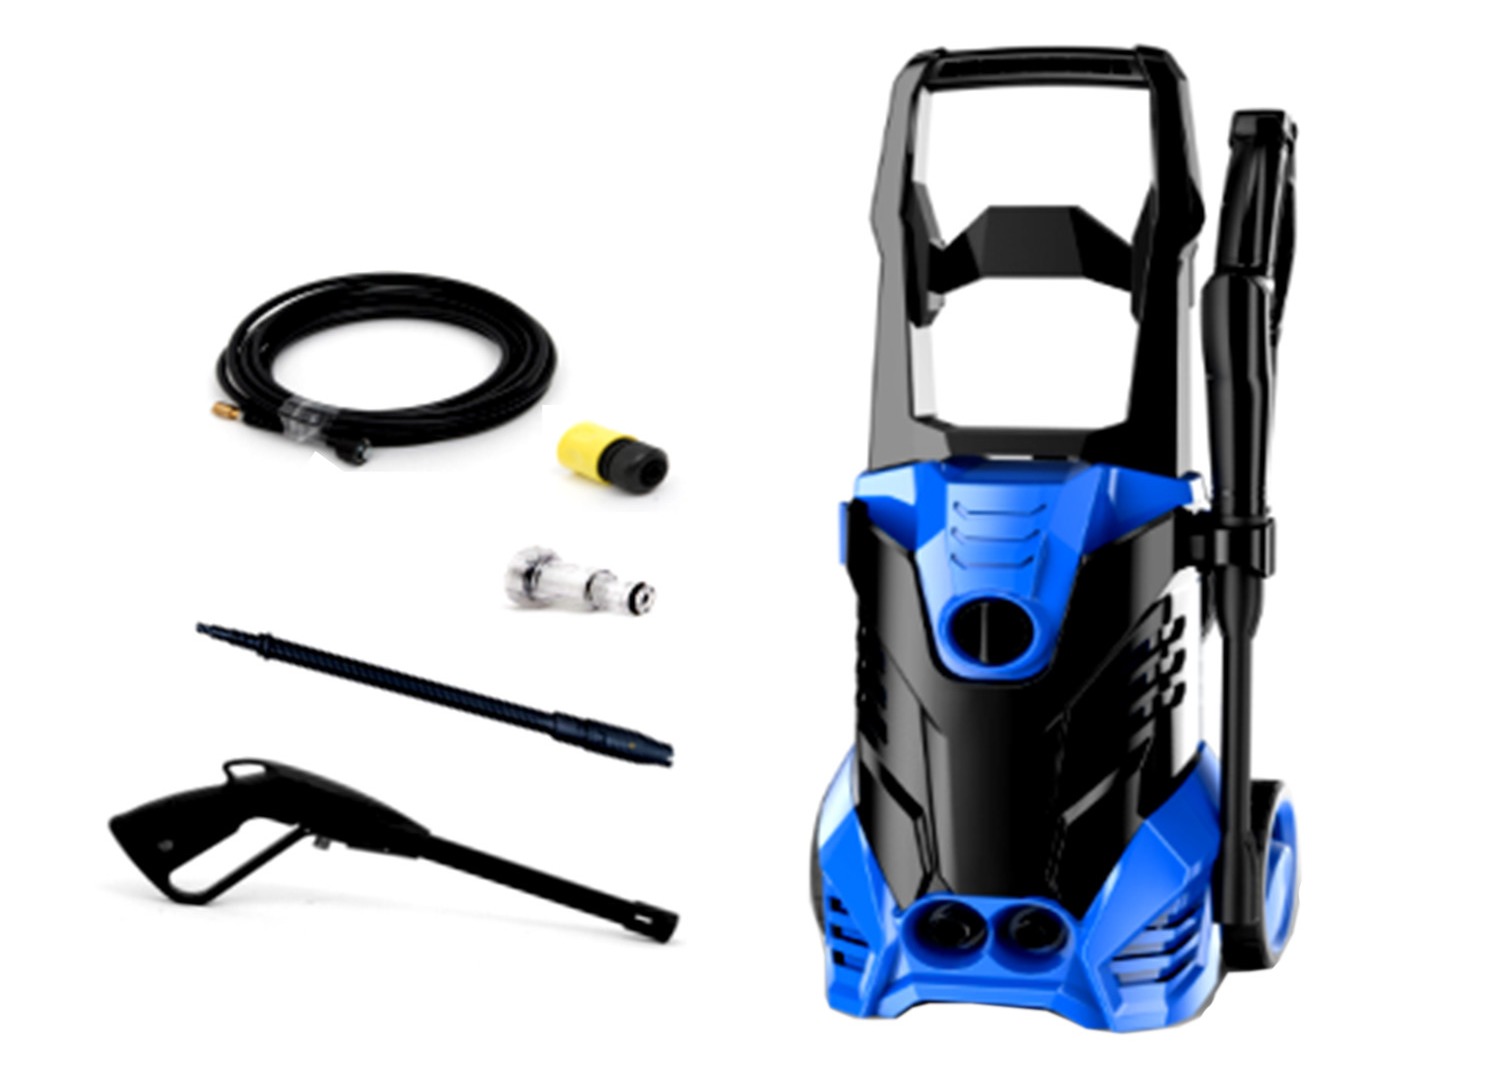 China 1800W 2000 PSI Portable High Pressure Washer on sale